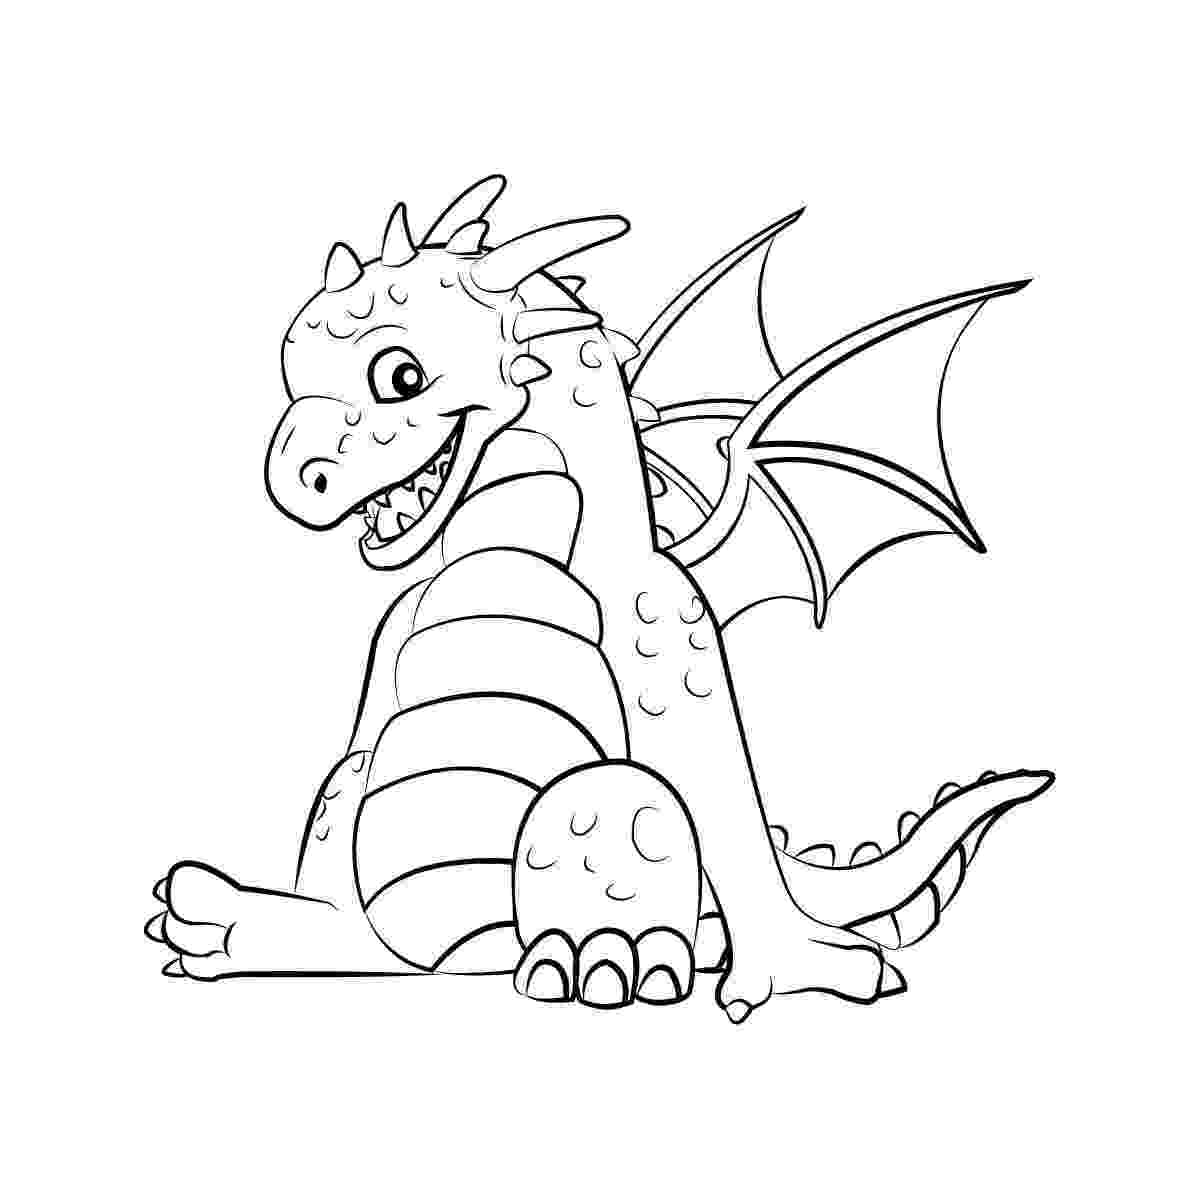 dragon coloring pictures dragon colouring book 52 pages infinite combinations pictures coloring dragon 